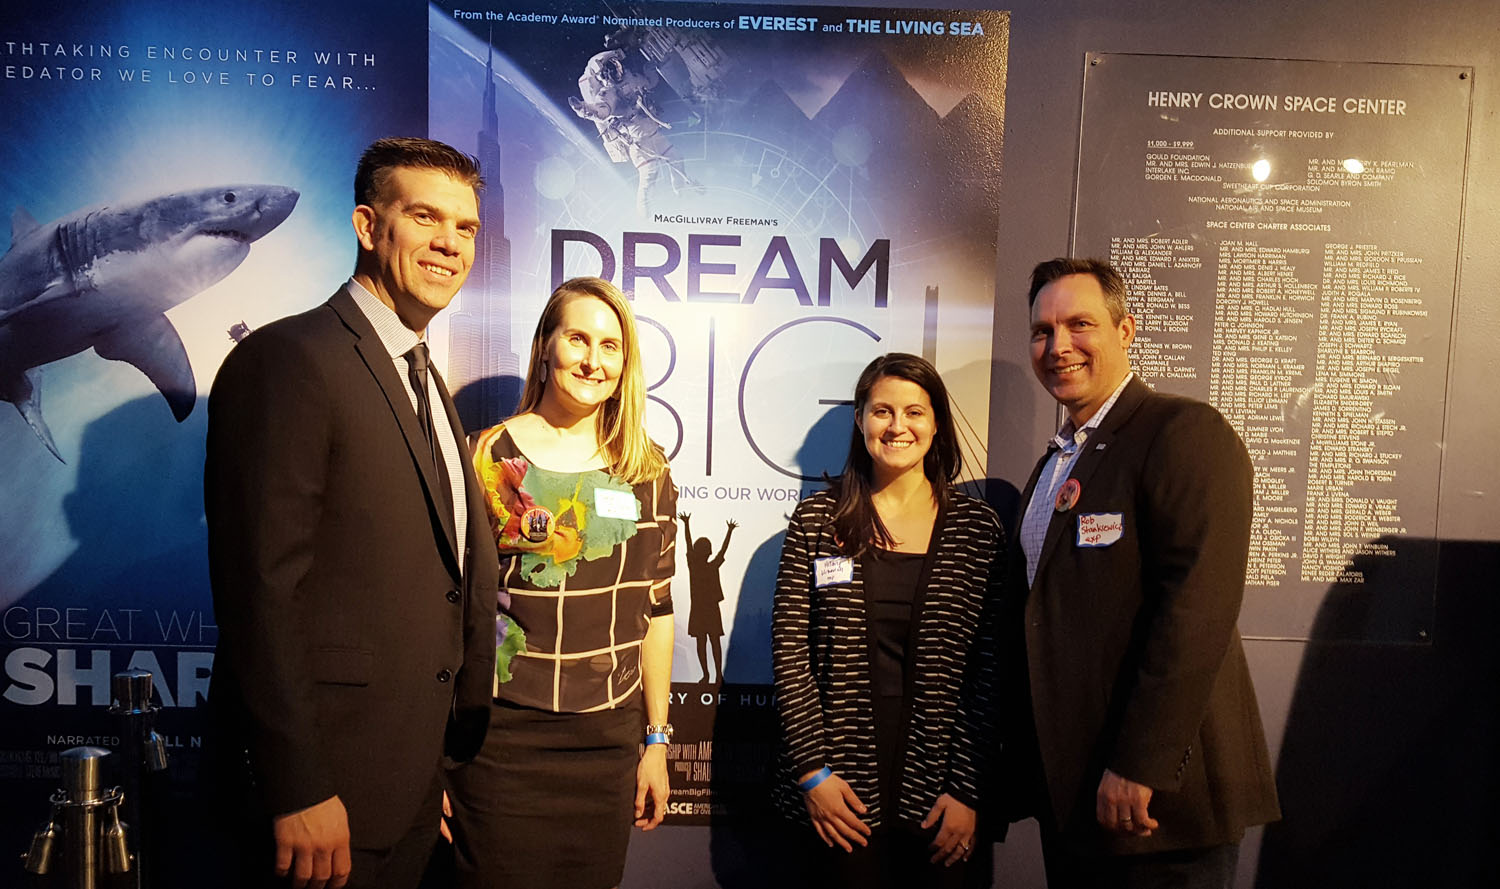 A group of people posing in front of a poster for dream big shark.